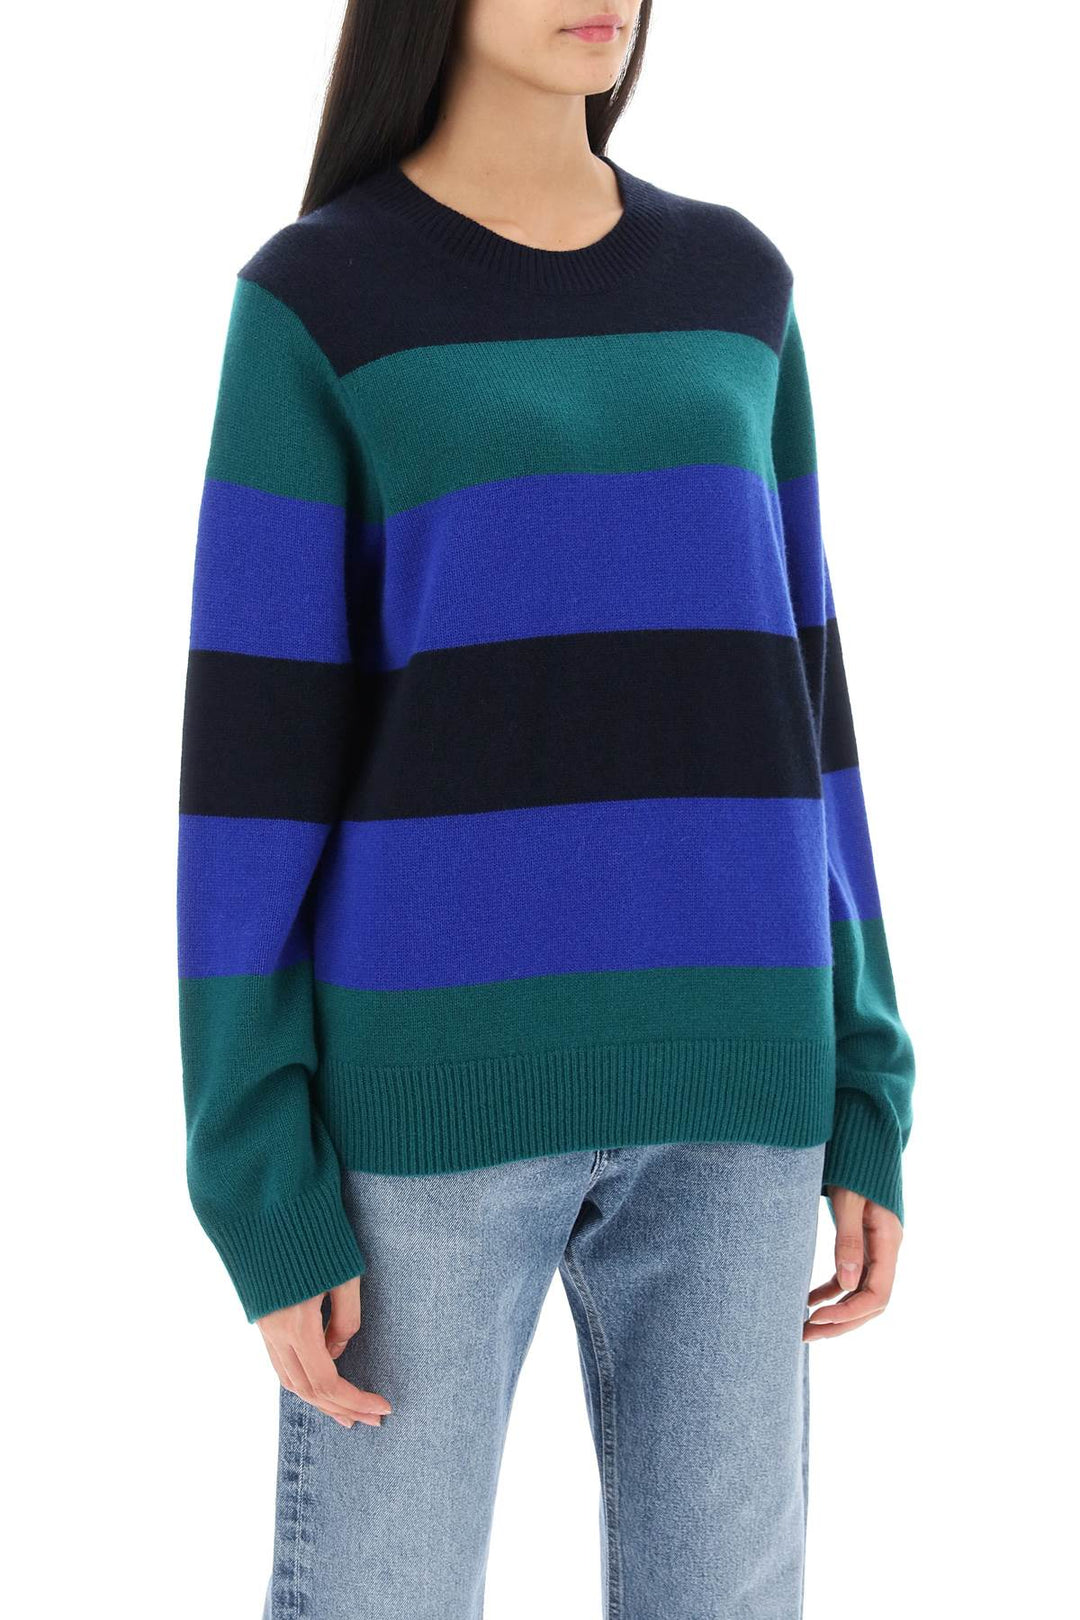 Guest In Residence Striped Cashmere Sweater   Verde